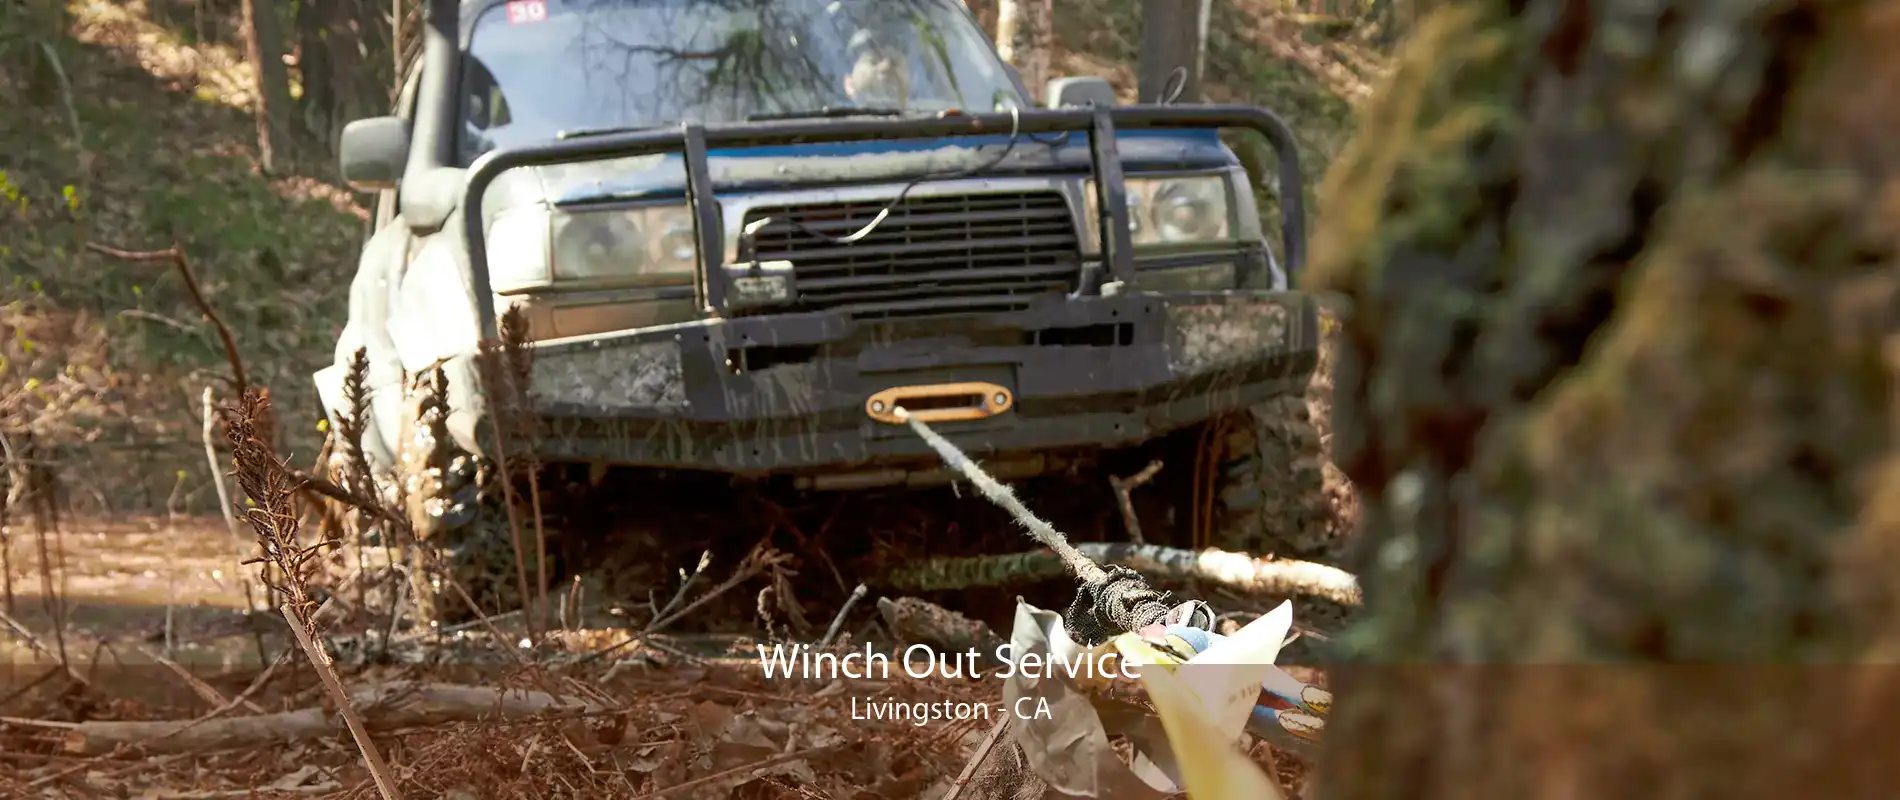 Winch Out Service Livingston - CA